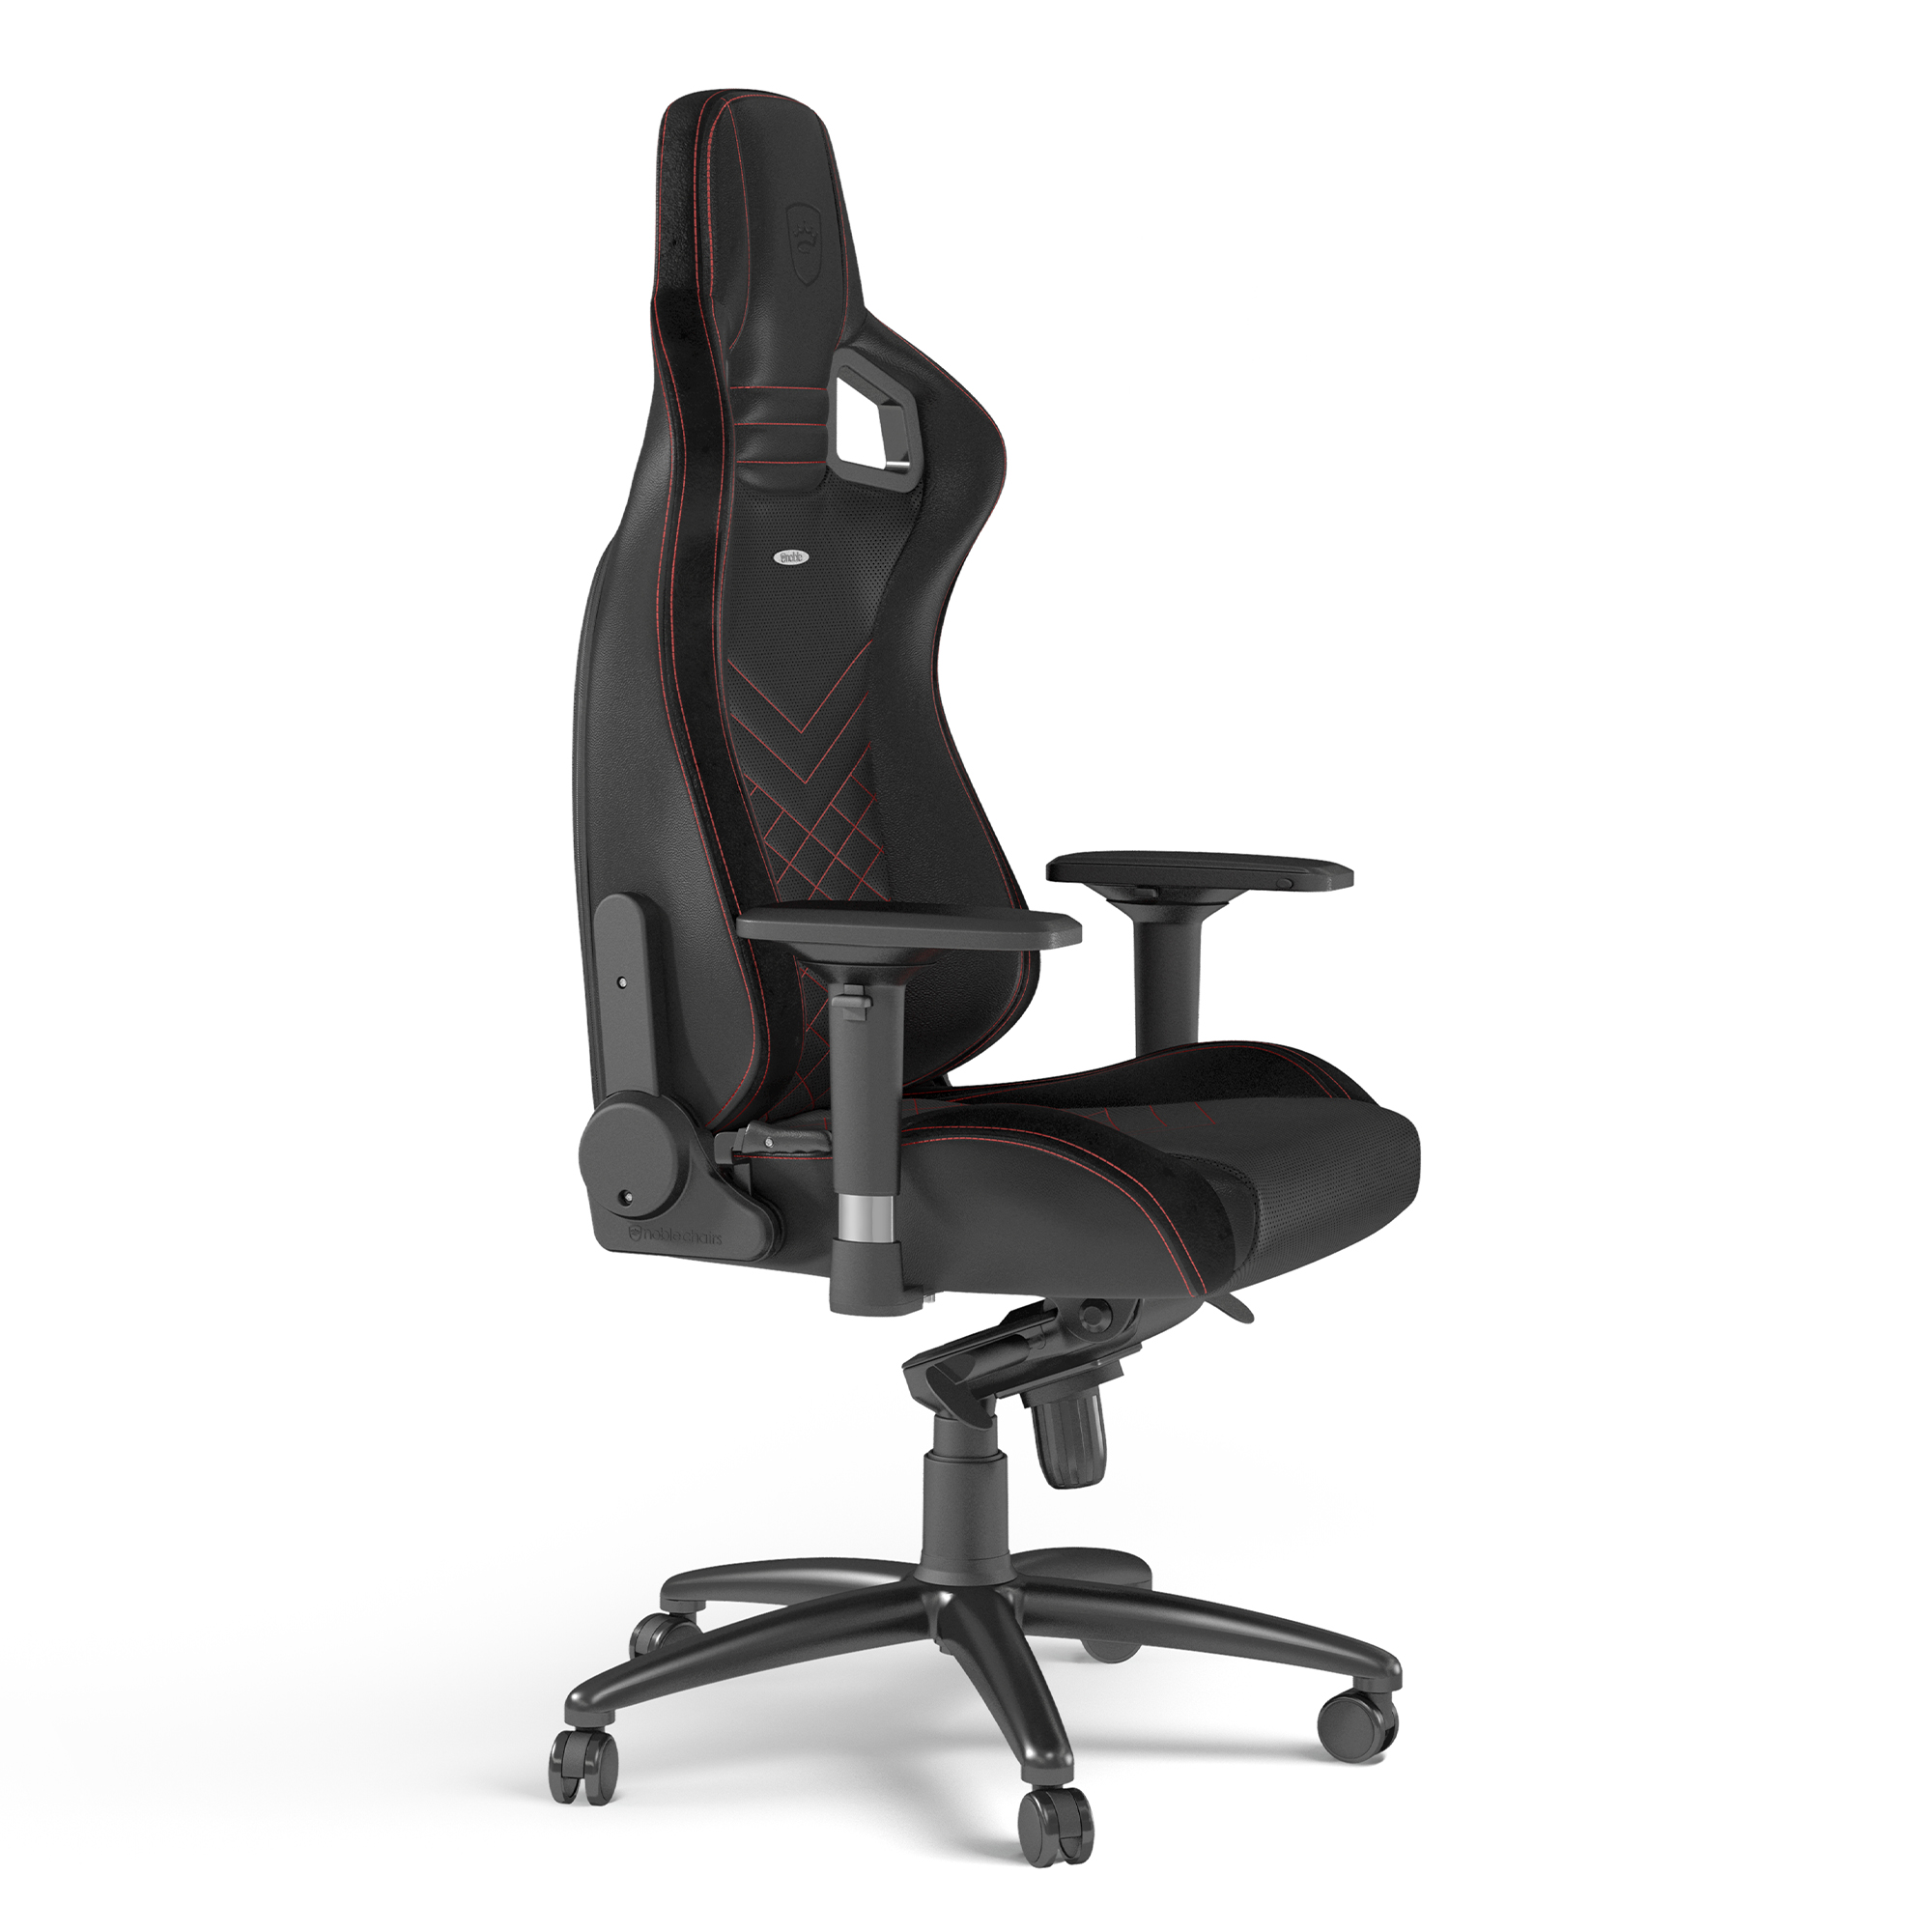 noblechairs - noblechairs EPIC Gaming Chair - Black/Red